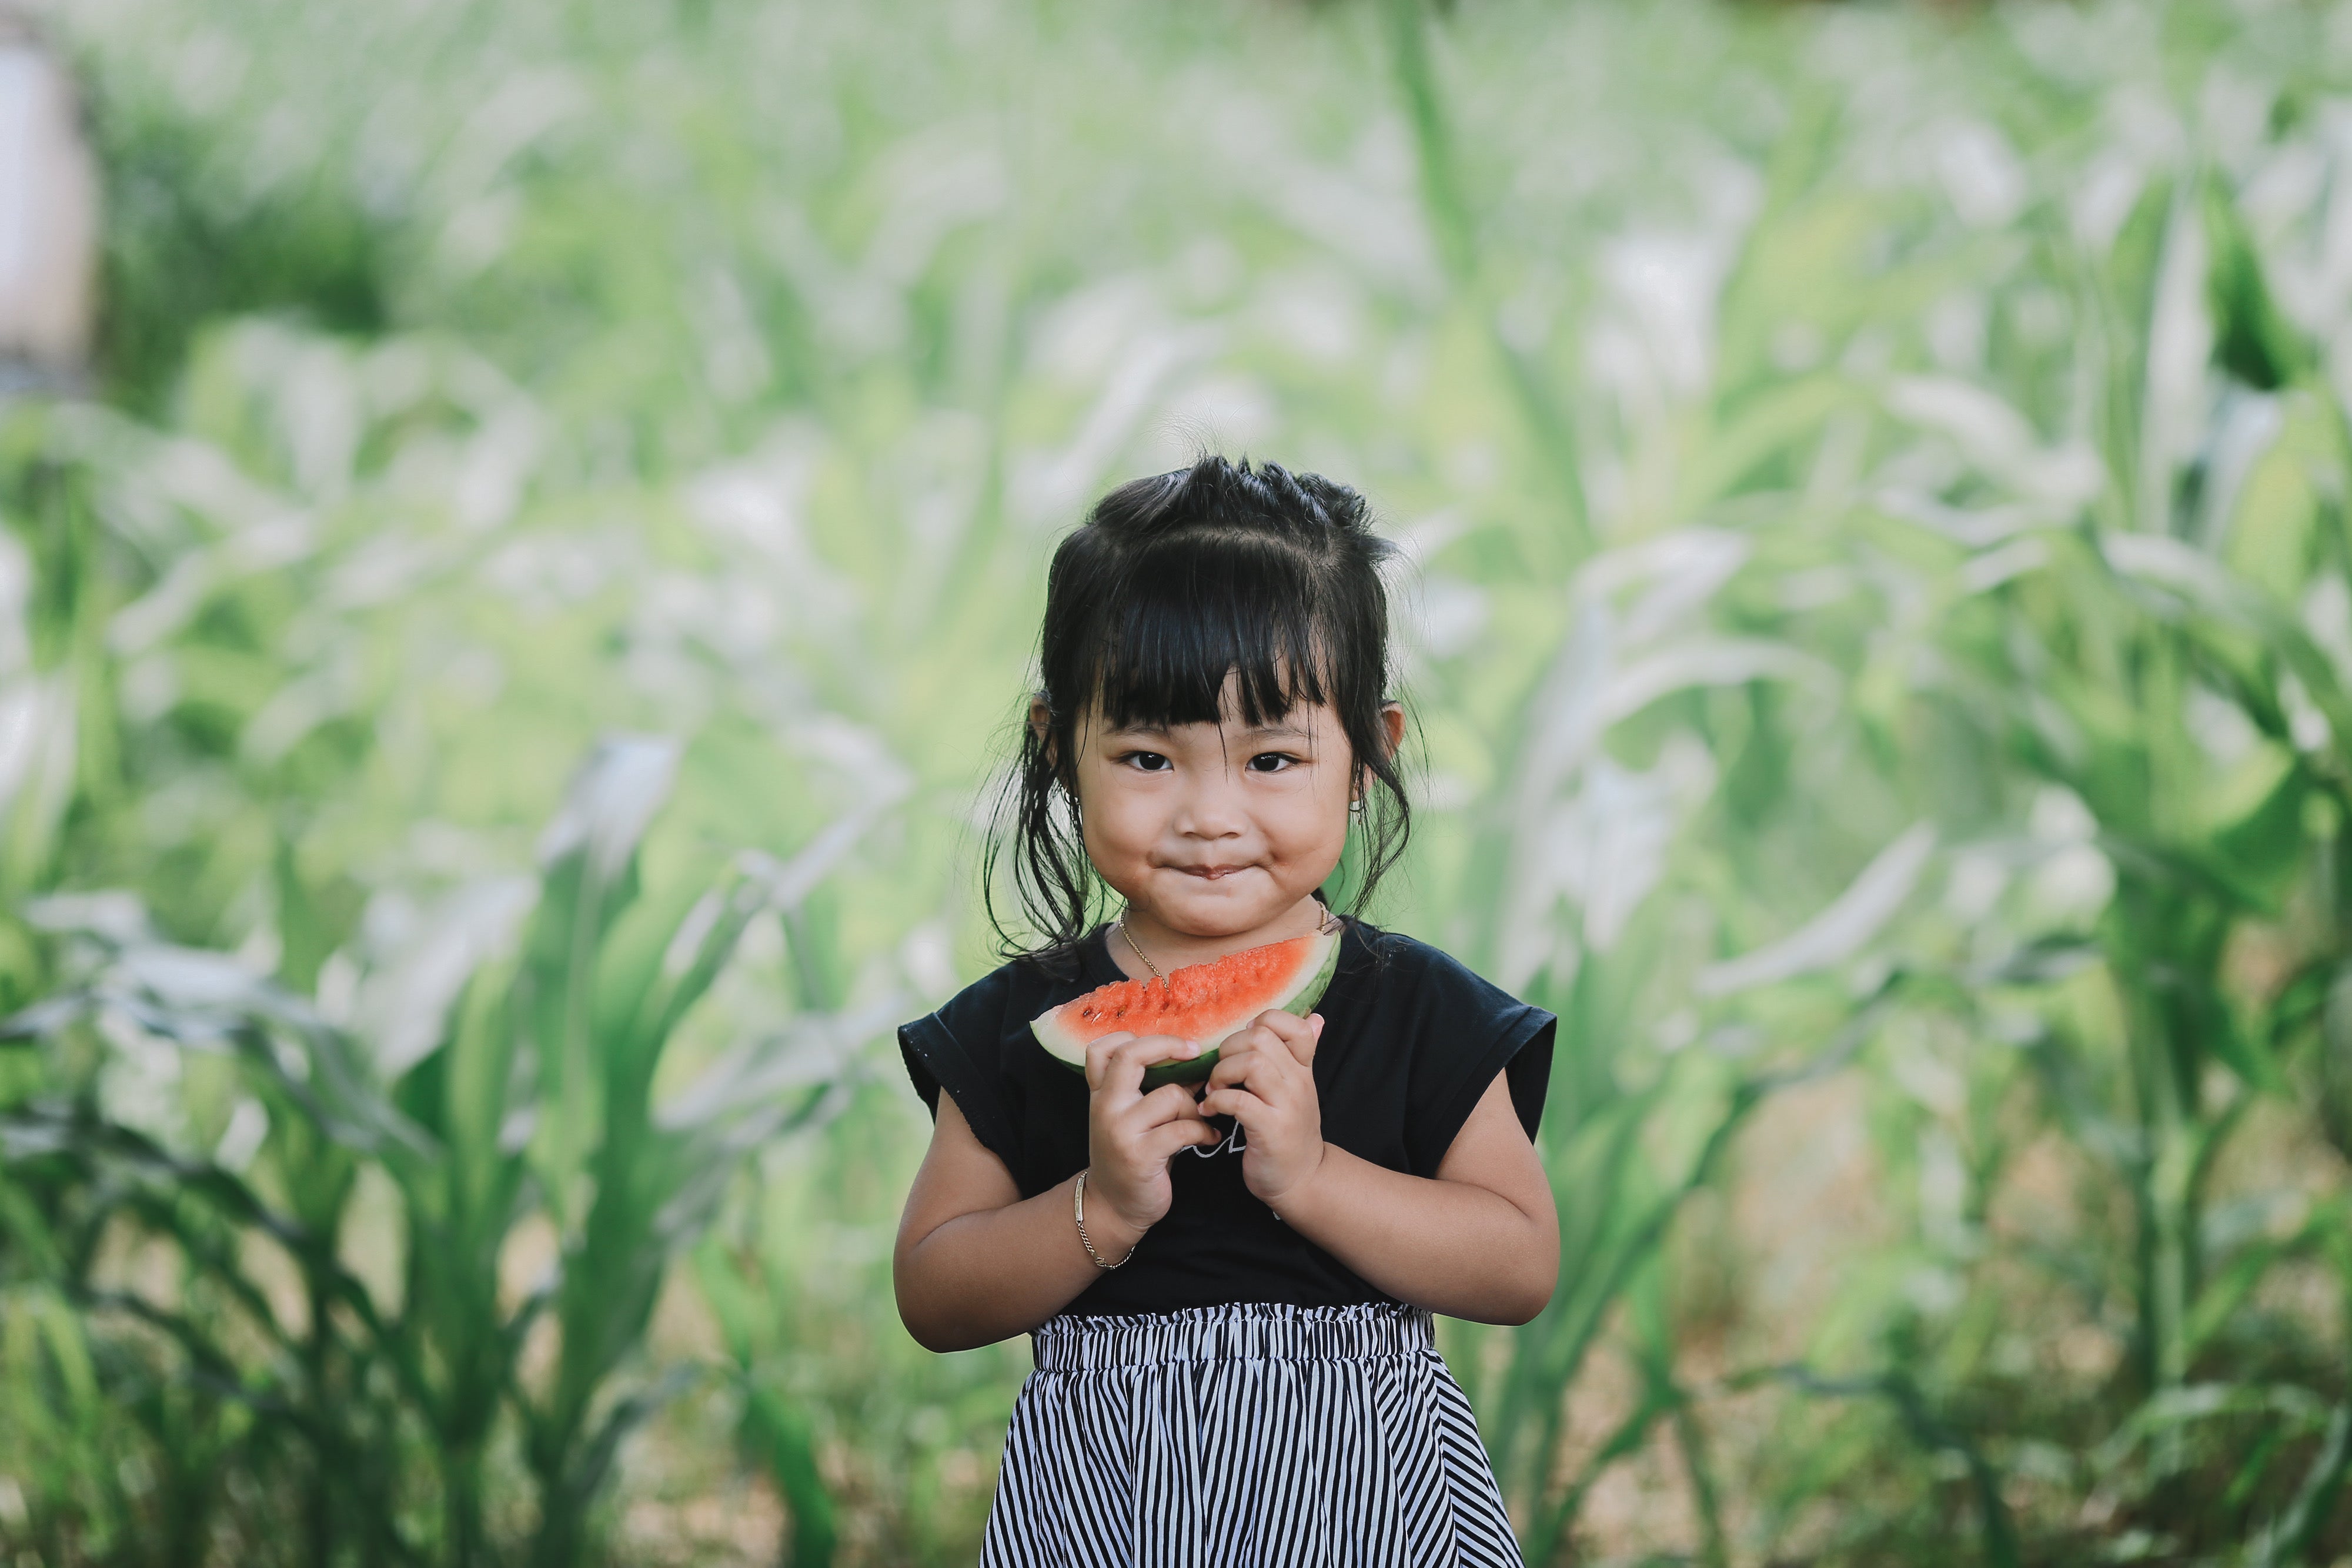 A cute Asian toddler eating watermelon slice on a hot summer day in a garden. Concept of healthy summer snacks for toddlers.